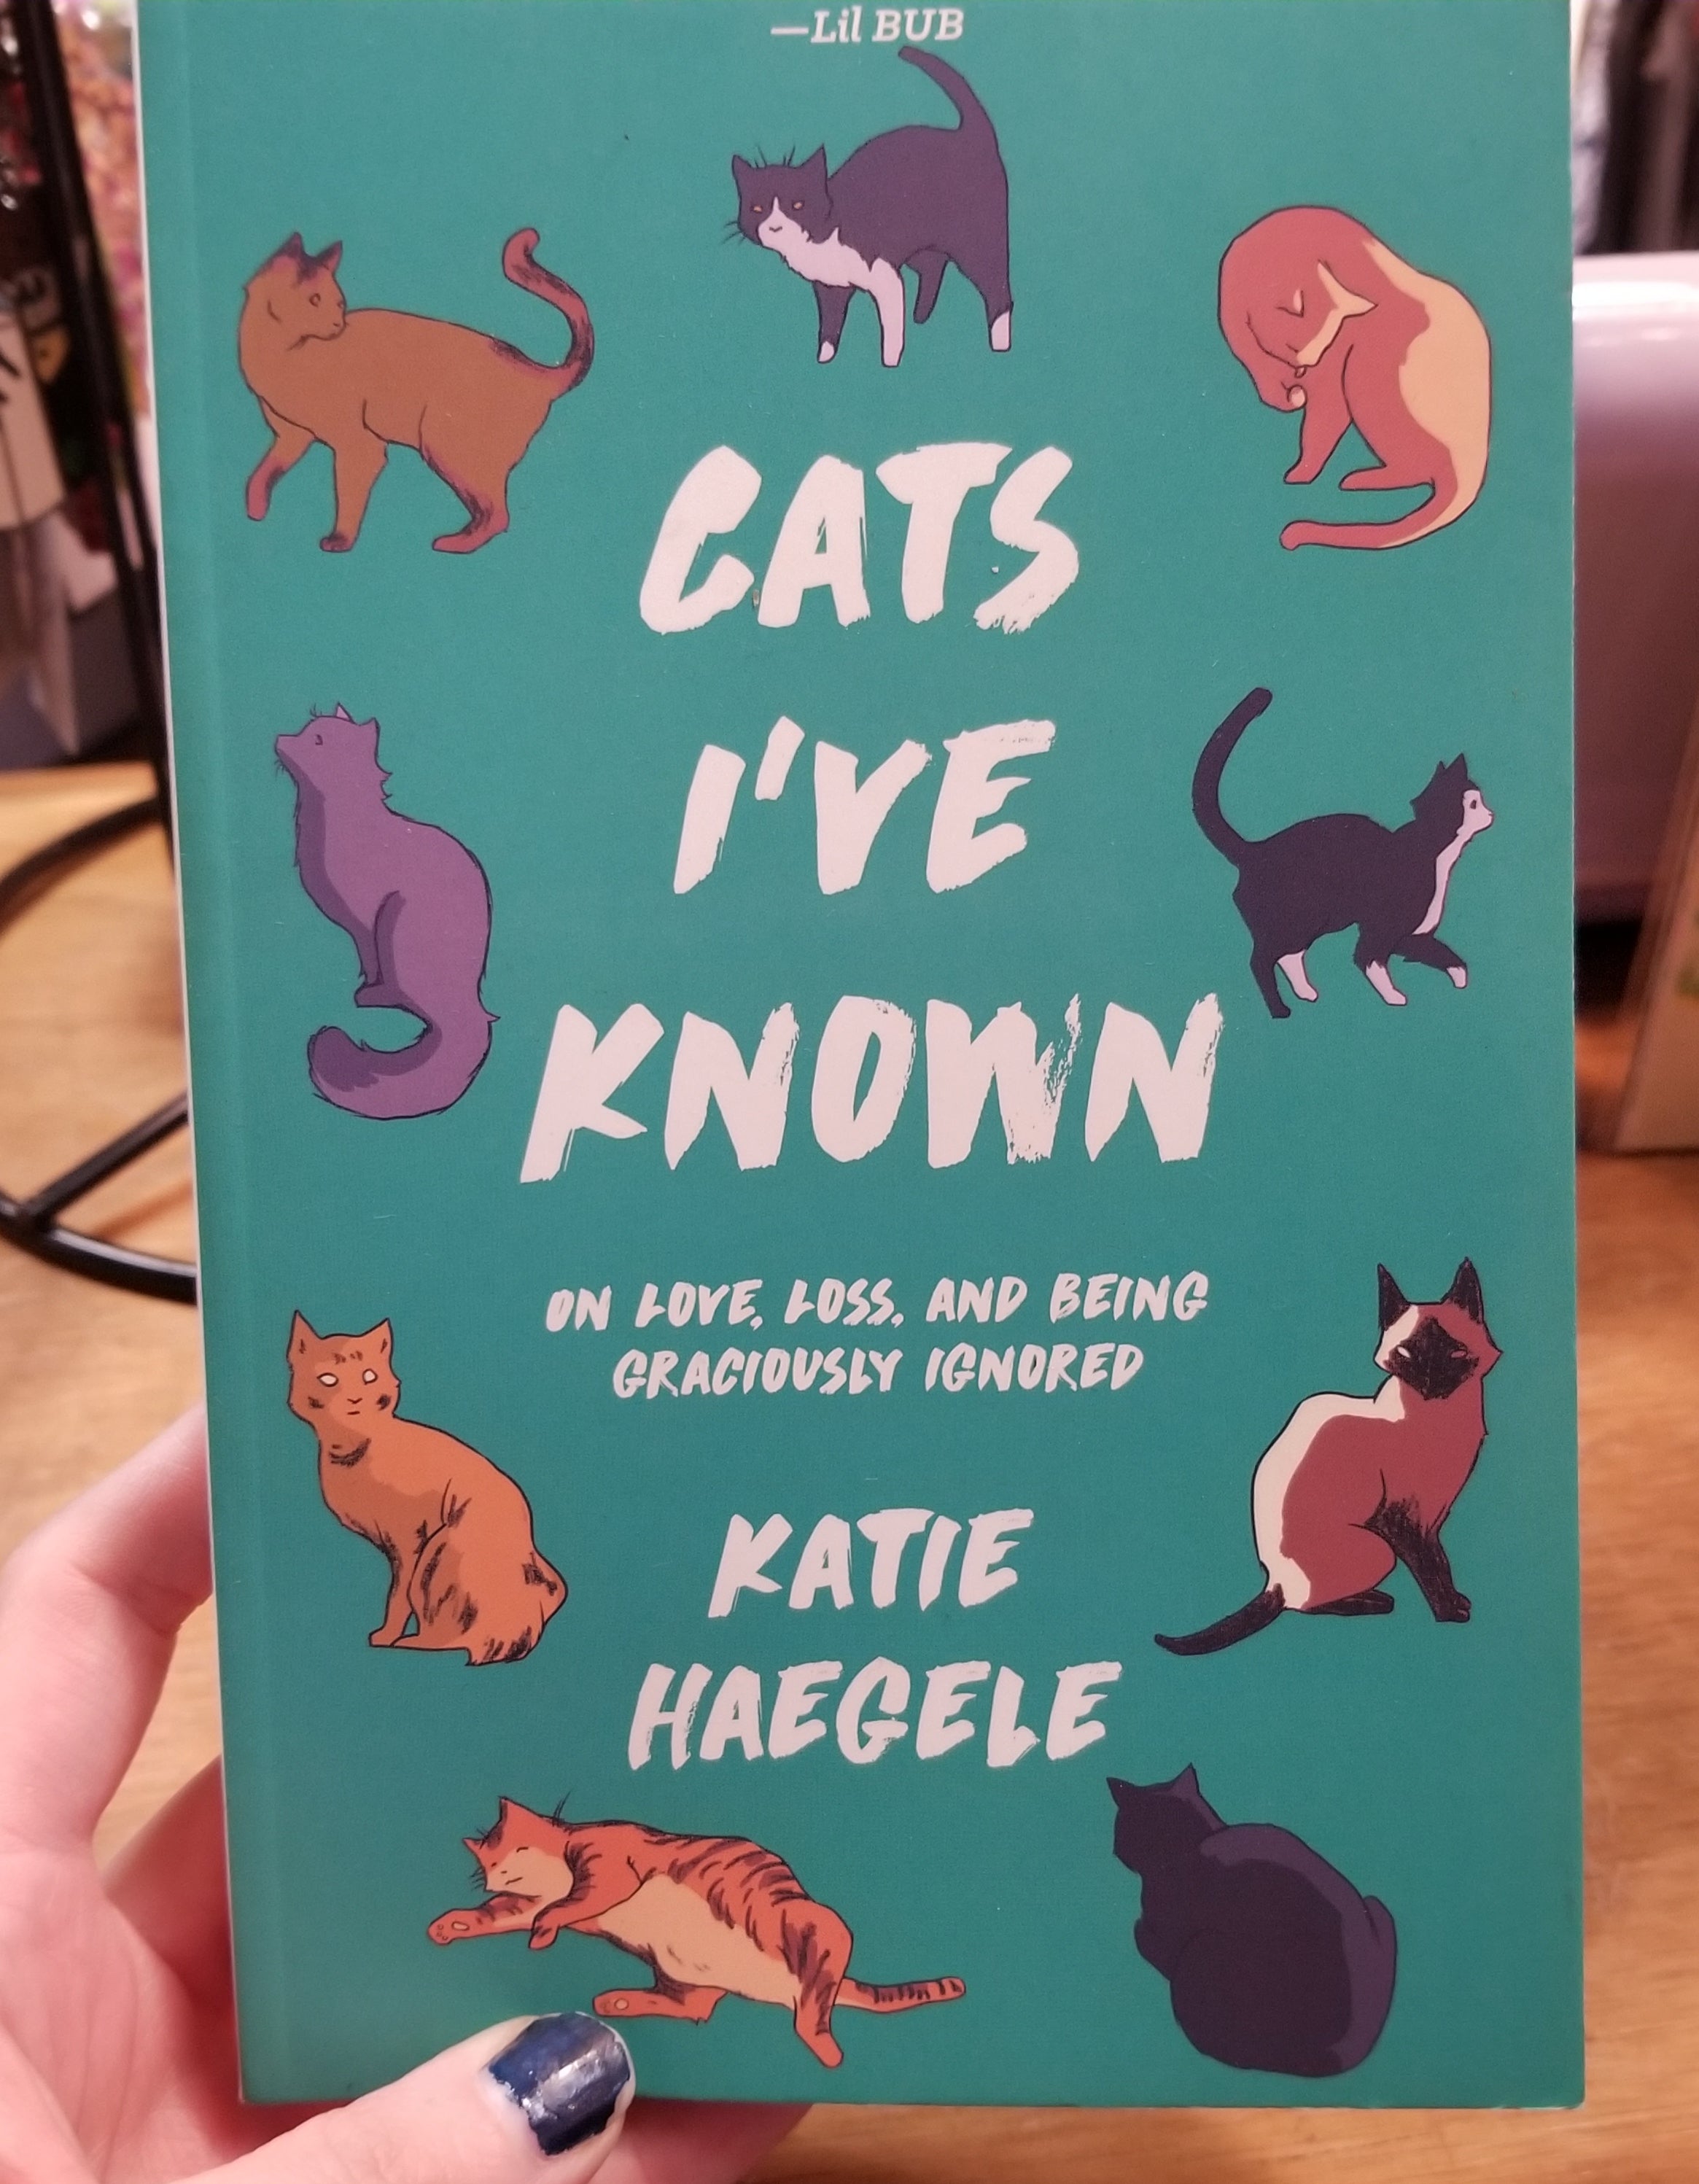 Cats I've Known: On Love, Loss, and Being Graciously Ignored BOOK  by Katie Haegele